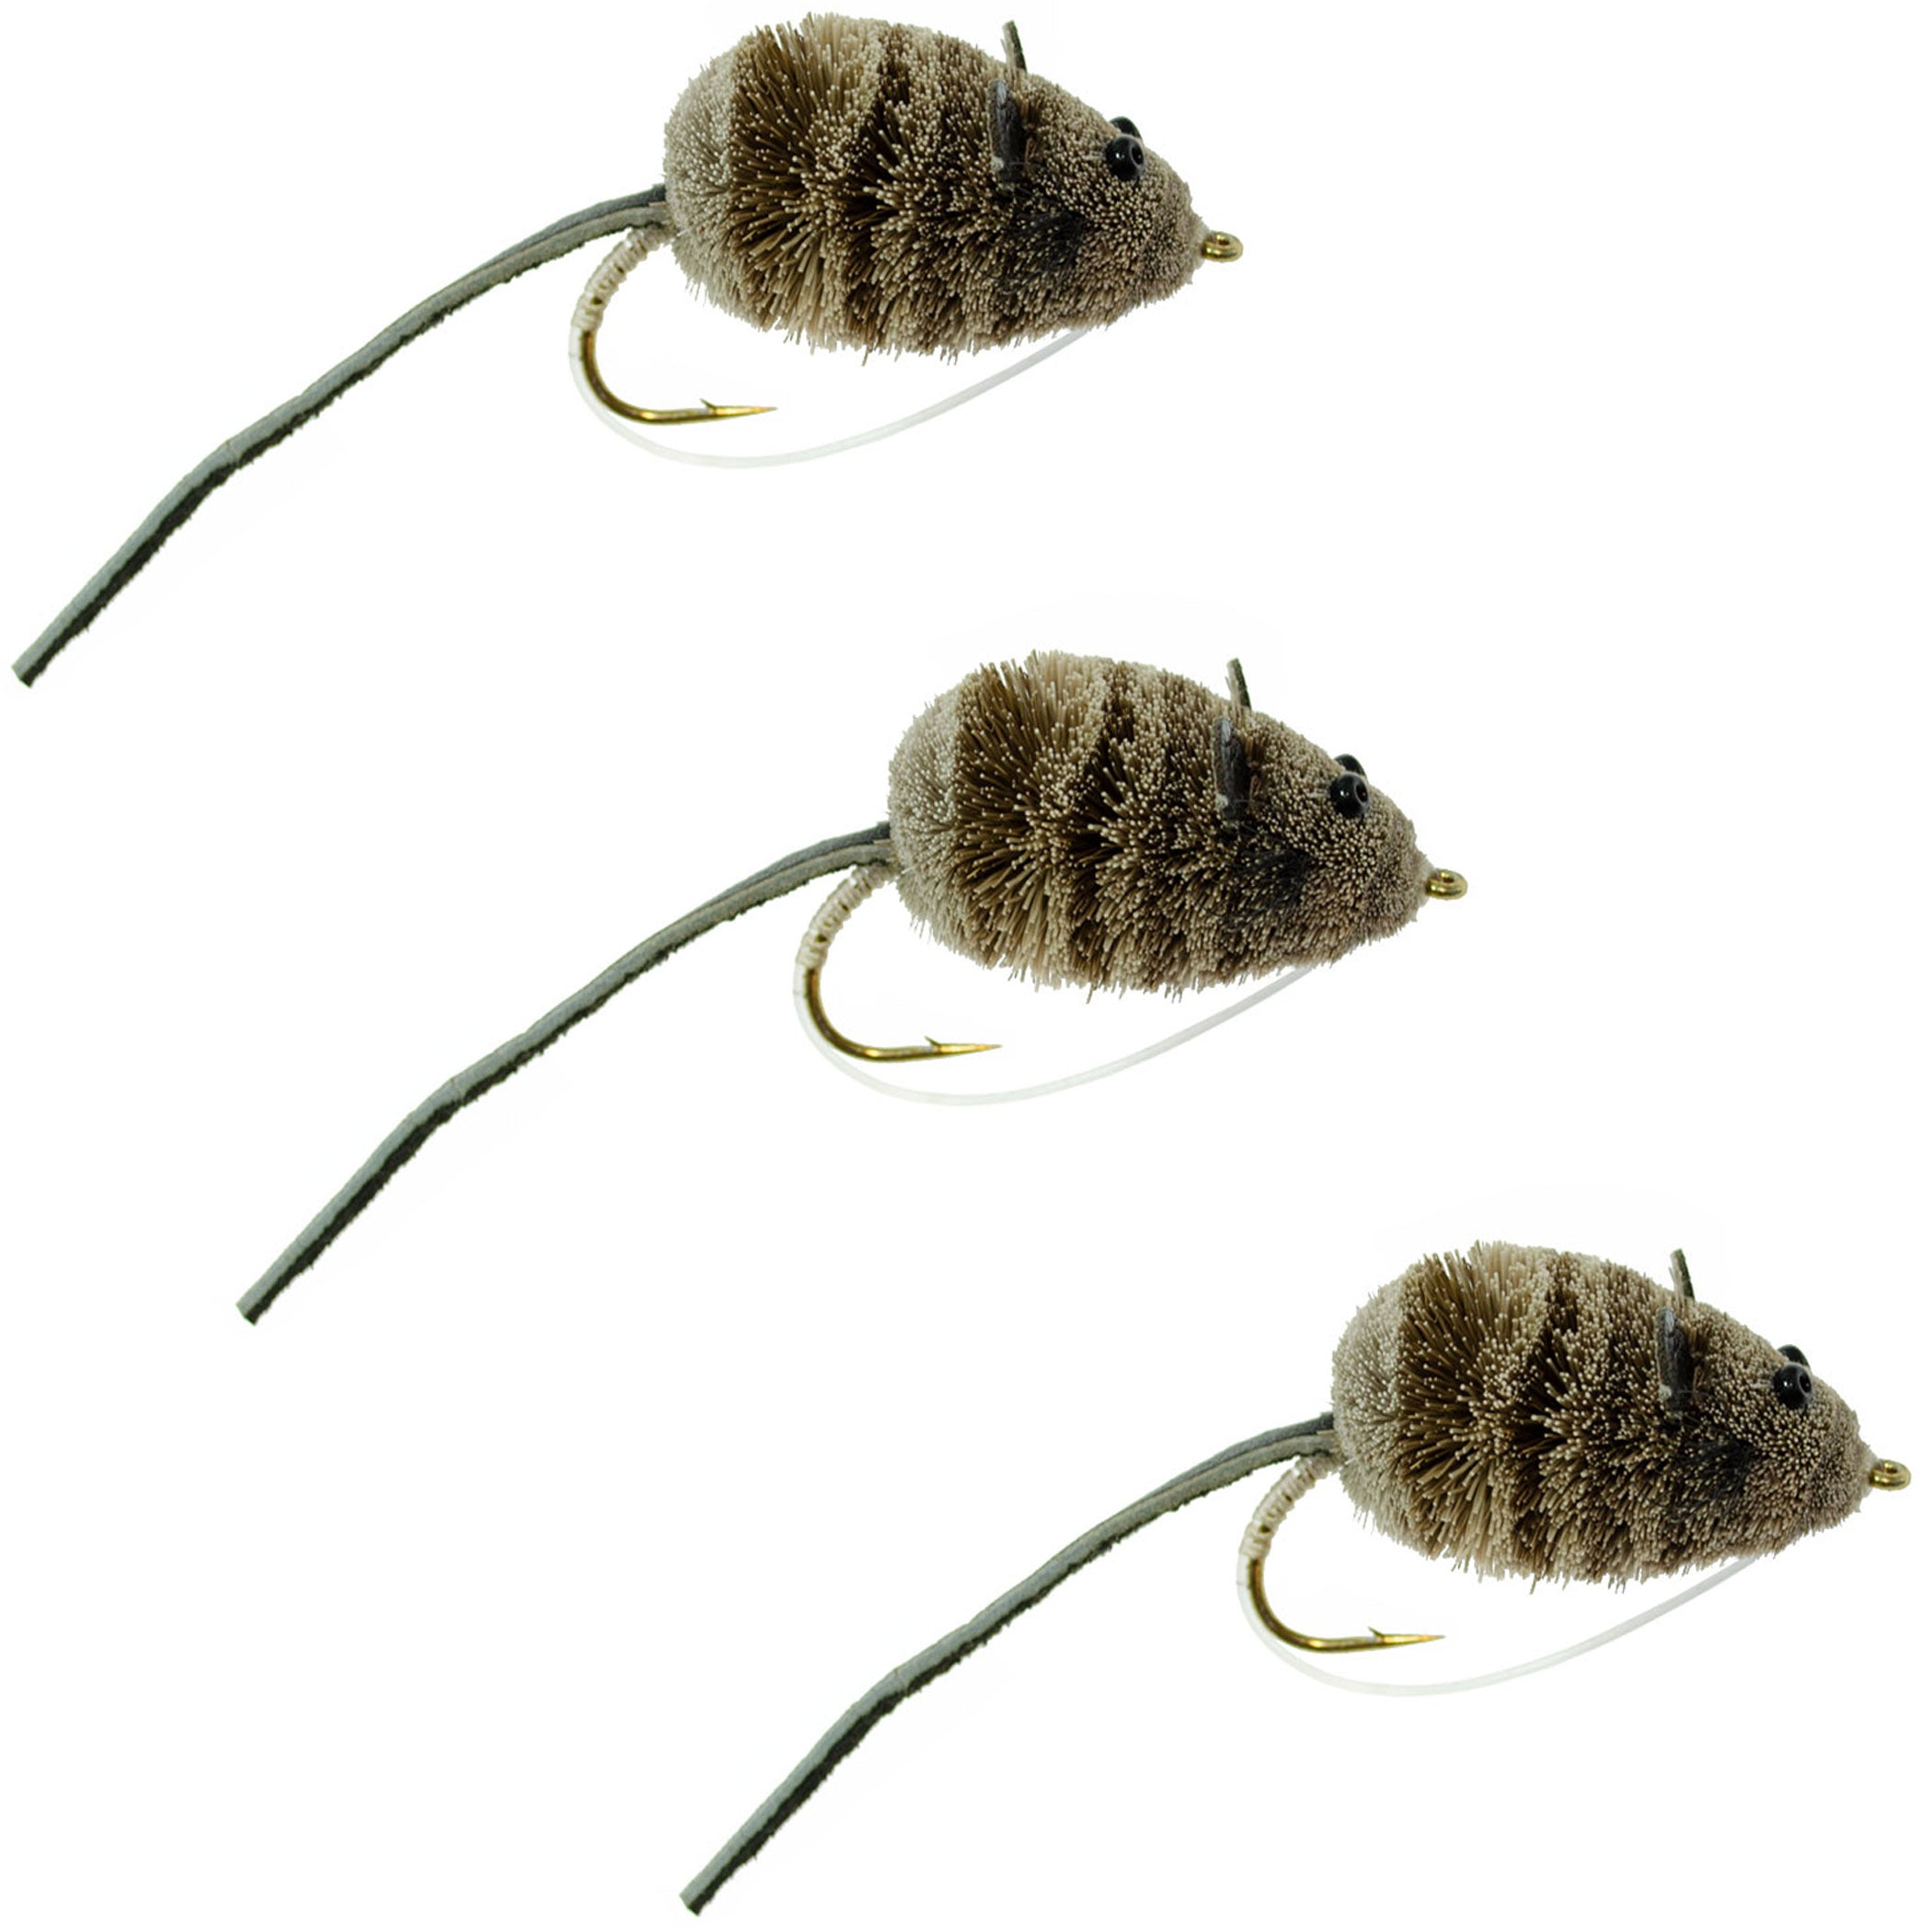 3 Pack Mighty Mouse Deer Hair Bug Size 4 - Bass Fly Fishing Bug Wide Gape Bass Hooks With Weed Guard